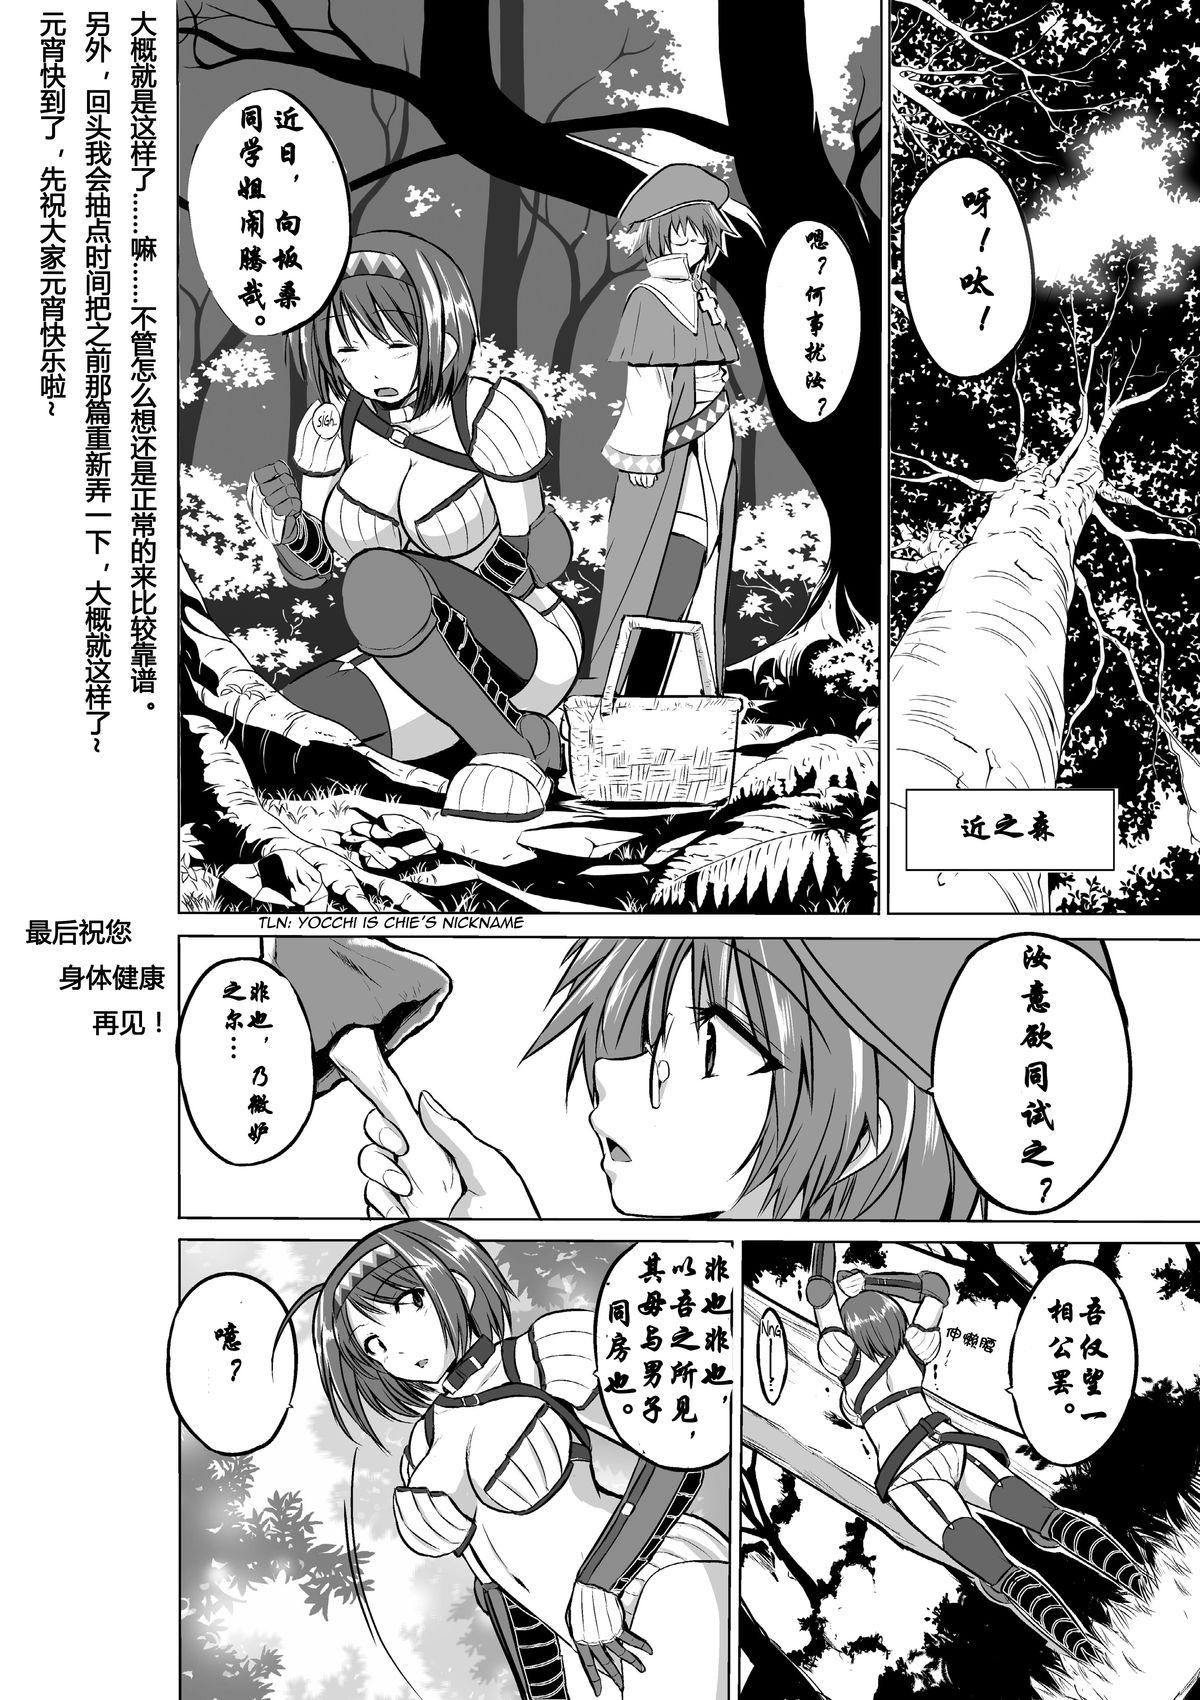 Big Boobs Dungeon Travelers - Chie no Himegoto - Toheart2 Hentai - Page 29